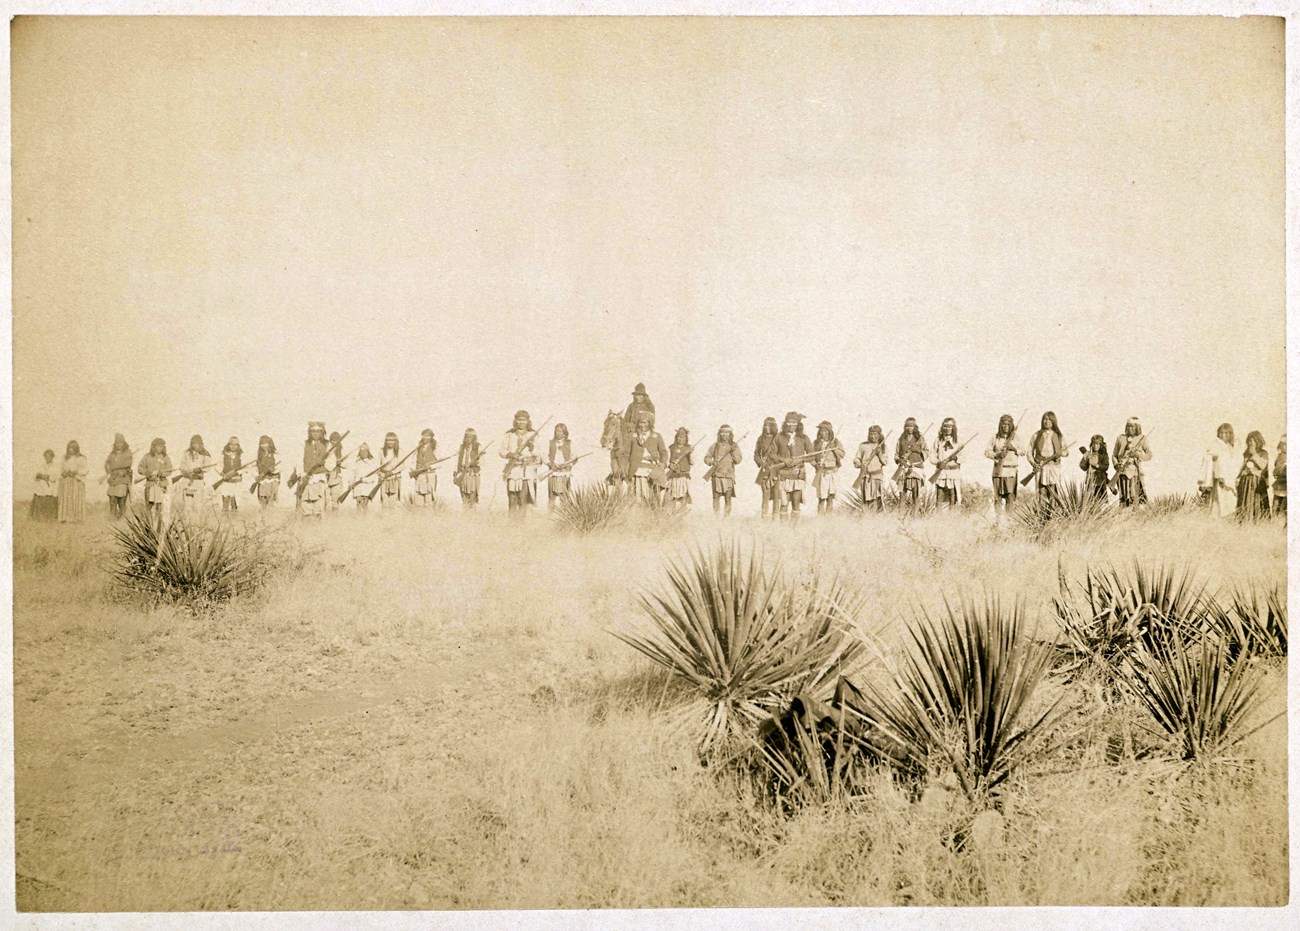 Sepia-tone photograph of line of warriors on foot, with one person on horseback. Agaves or yuccas and grasses in the foreground, and a clear sky in the background.